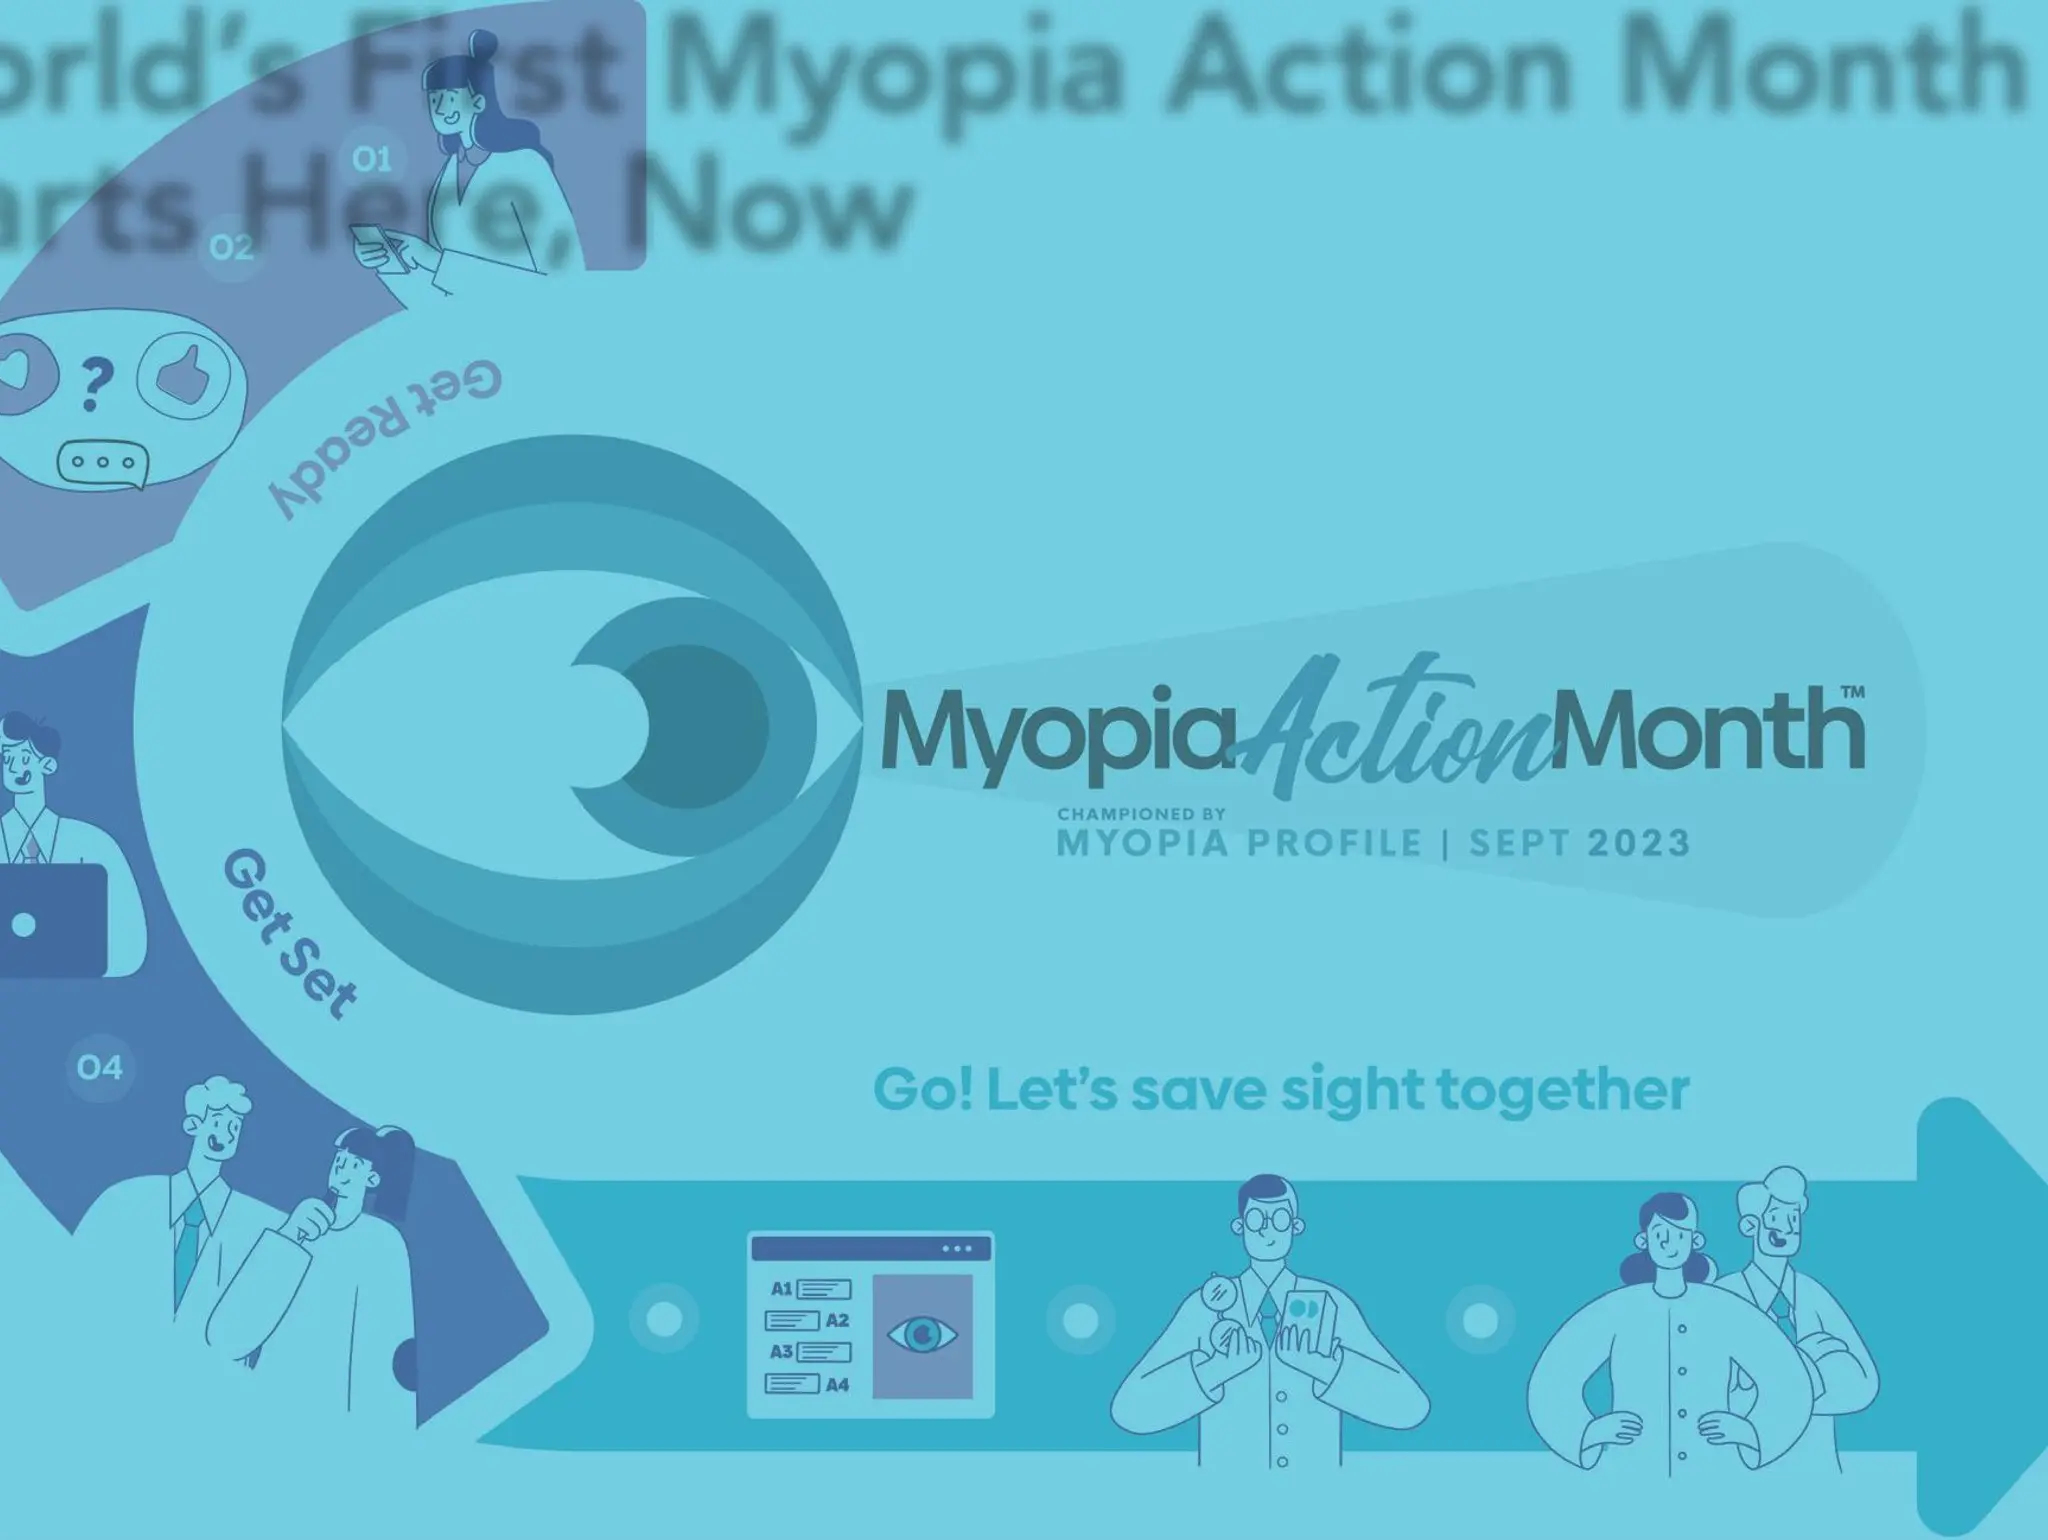 World’s First Myopia Action Month Starts Here, Now